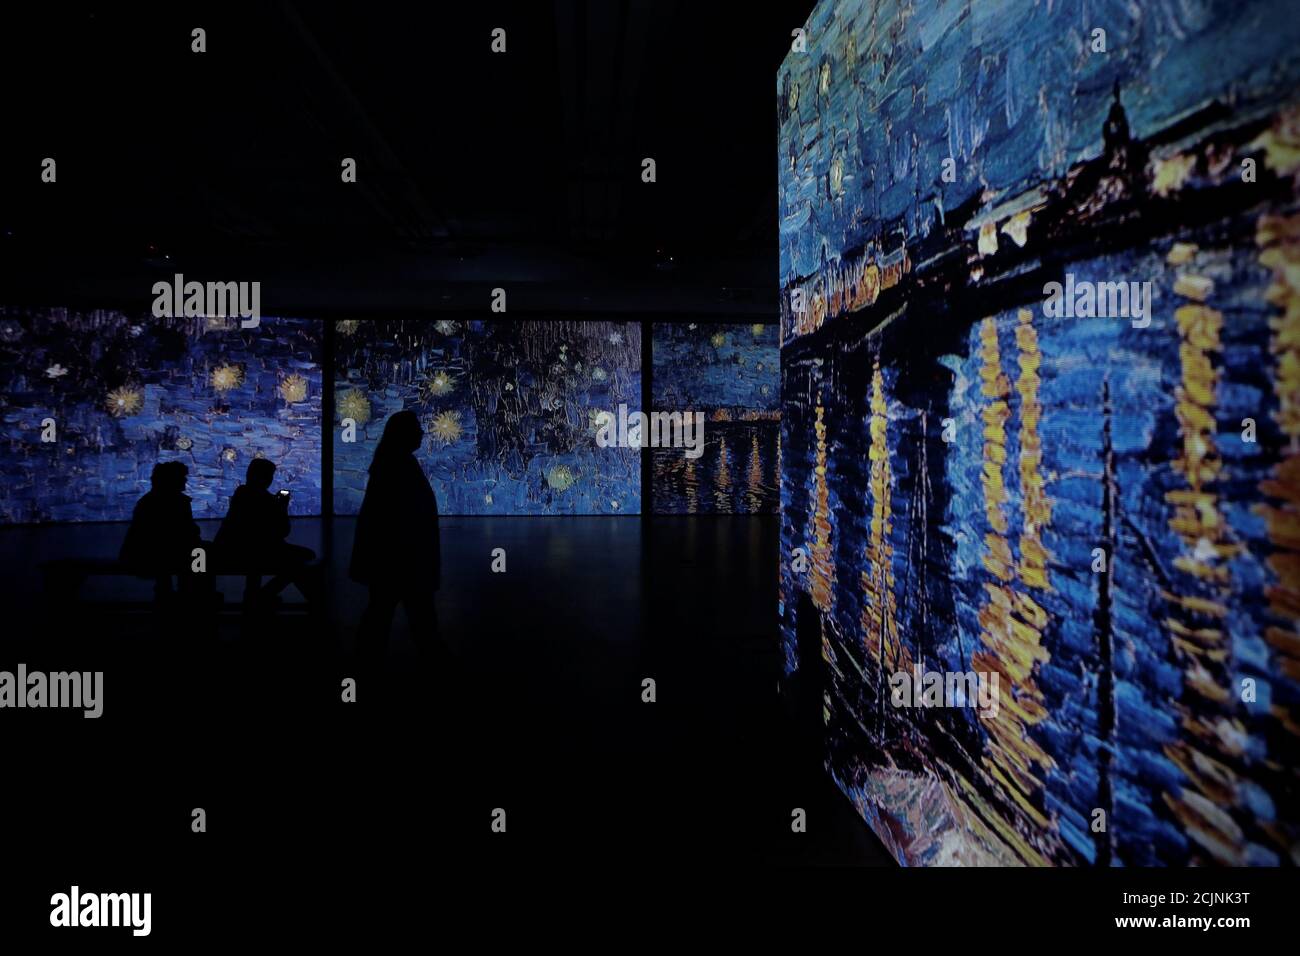 Visitors look at a projection of details of Vincent Van Gogh's painting  "Starry Night Over the Rhone" at the "Van Gogh Alive" exhibition in Athens,  Greece, November 10, 2017. Picture taken November